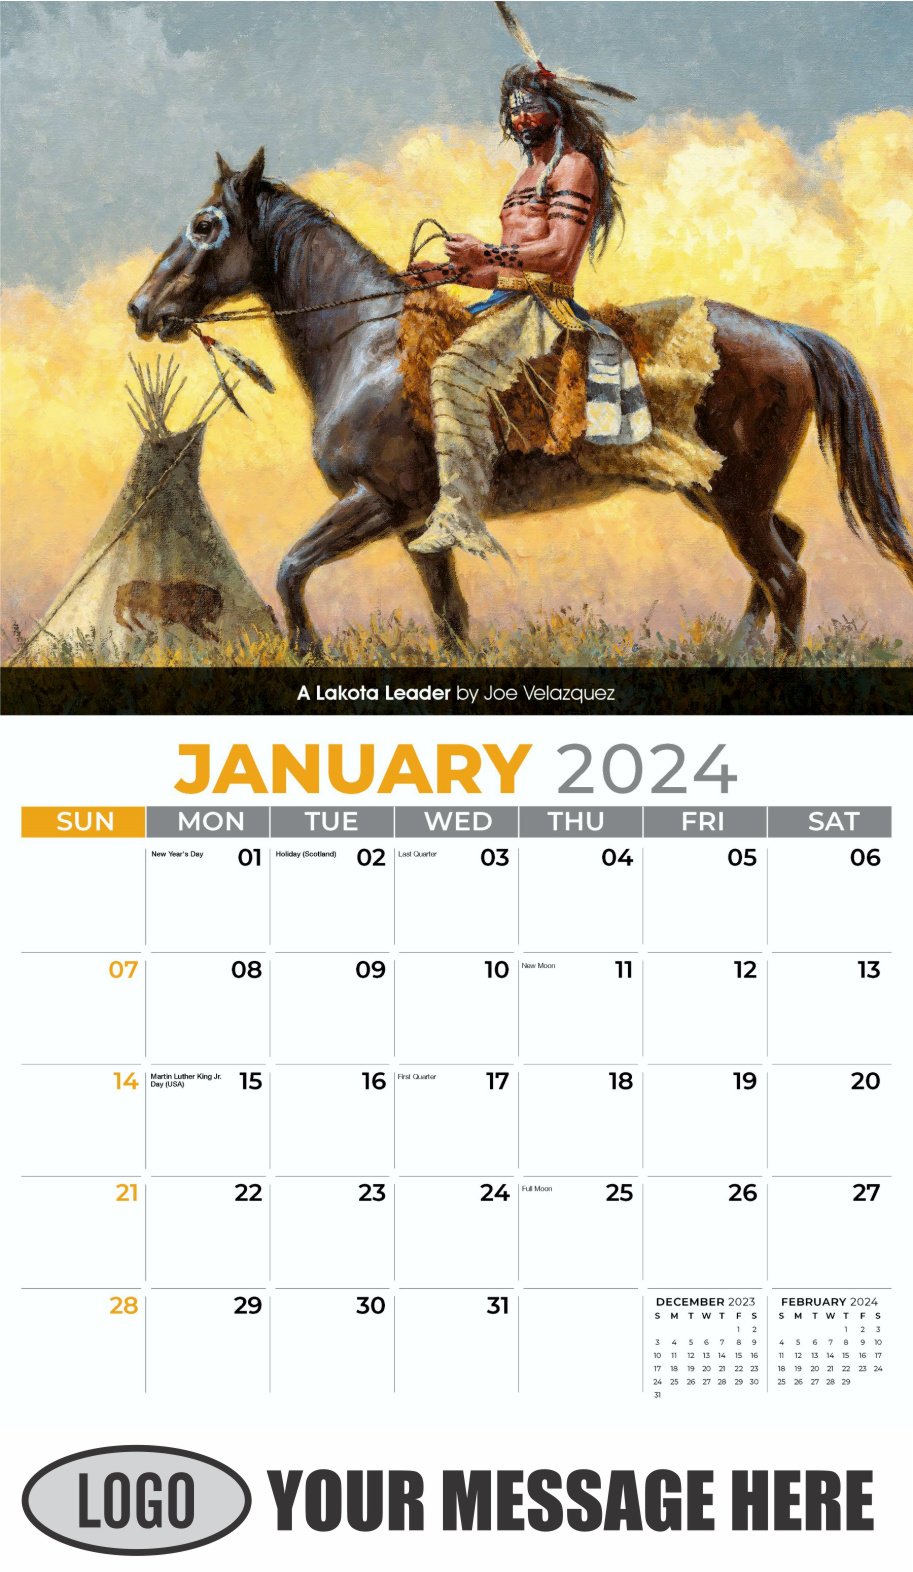 Spirit of the Old West 2024 Old West Art Business Promo Wall Calendar - January